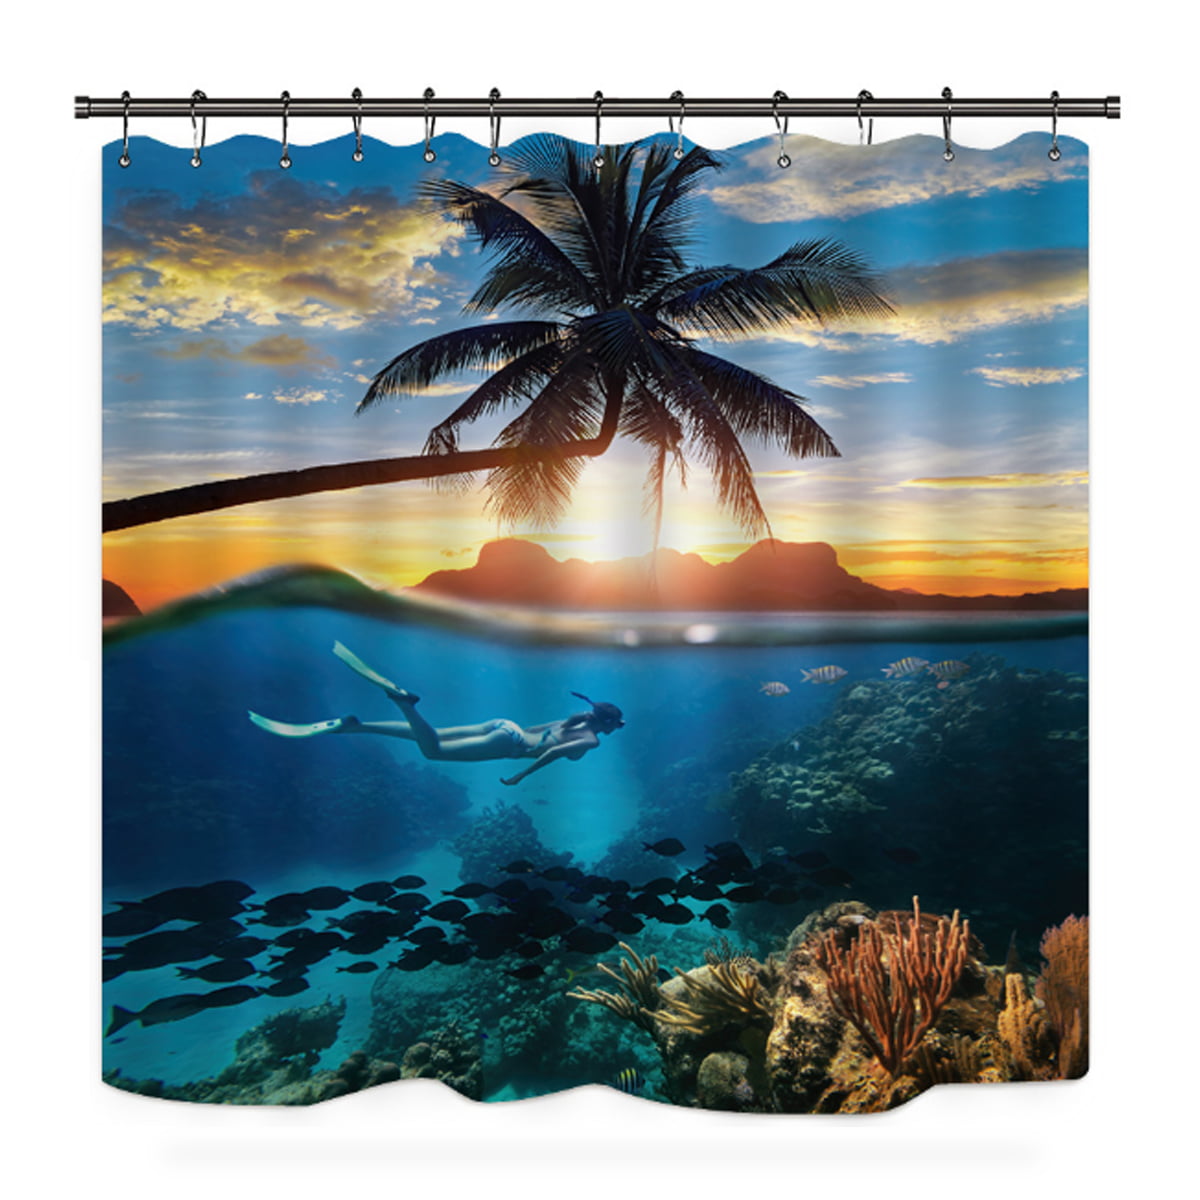 Sunset Natural Scenery Shower Curtain Non-Slip Rugs Bath Mat Toilet Cover Sets 